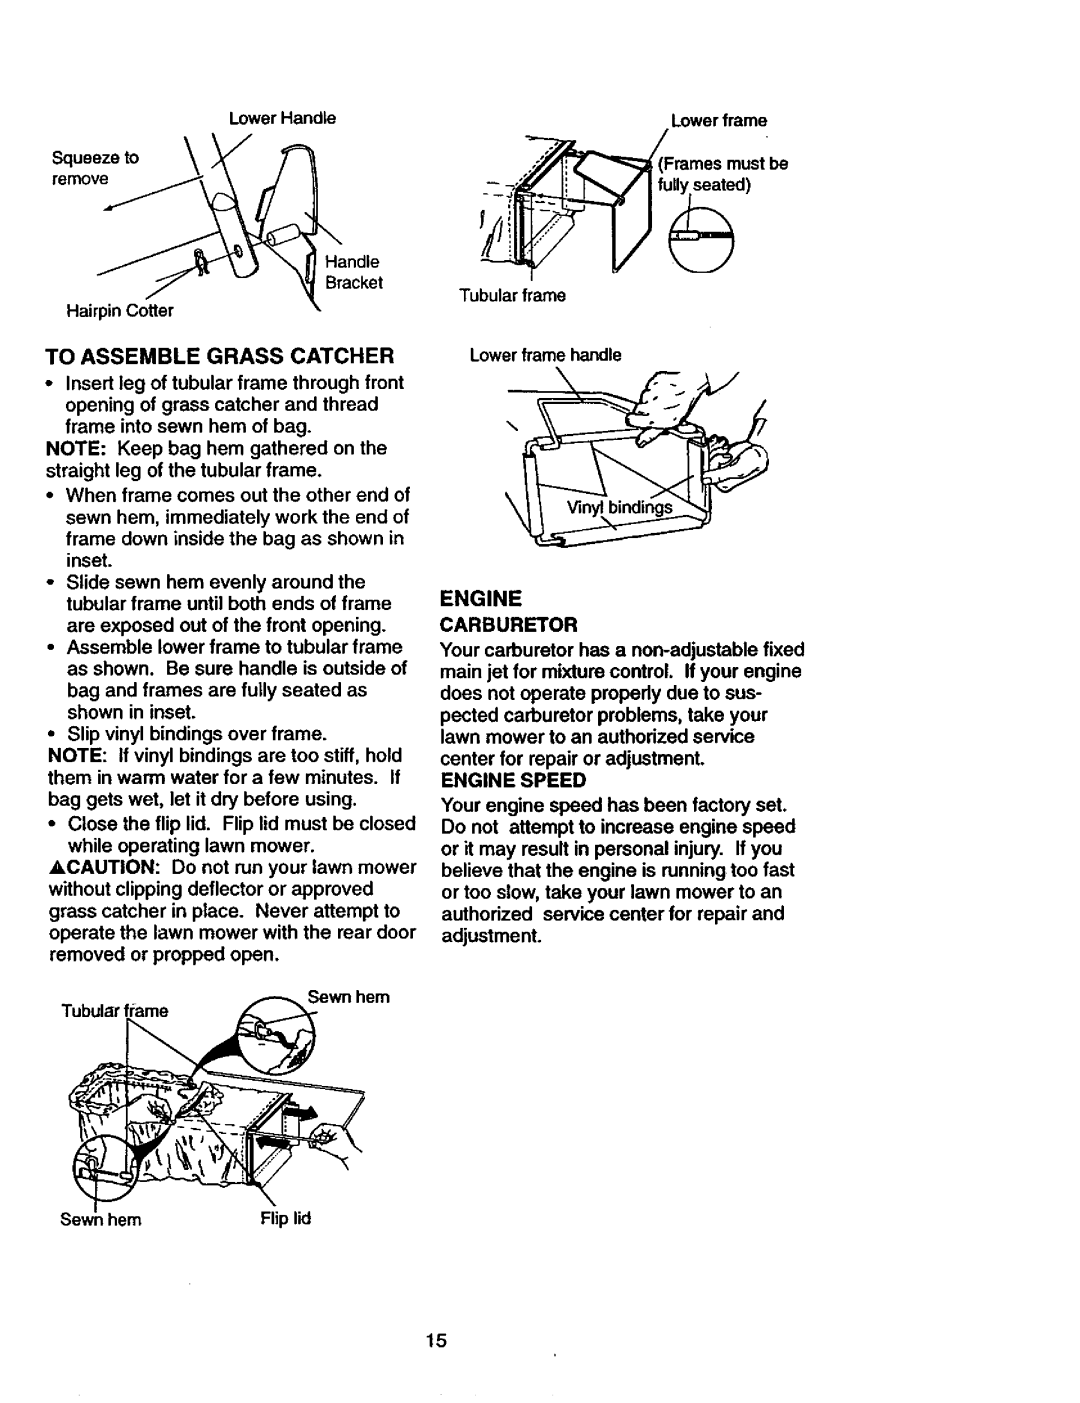 Craftsman 917.377582 owner manual To Assemble Grass Catcher, Engine 